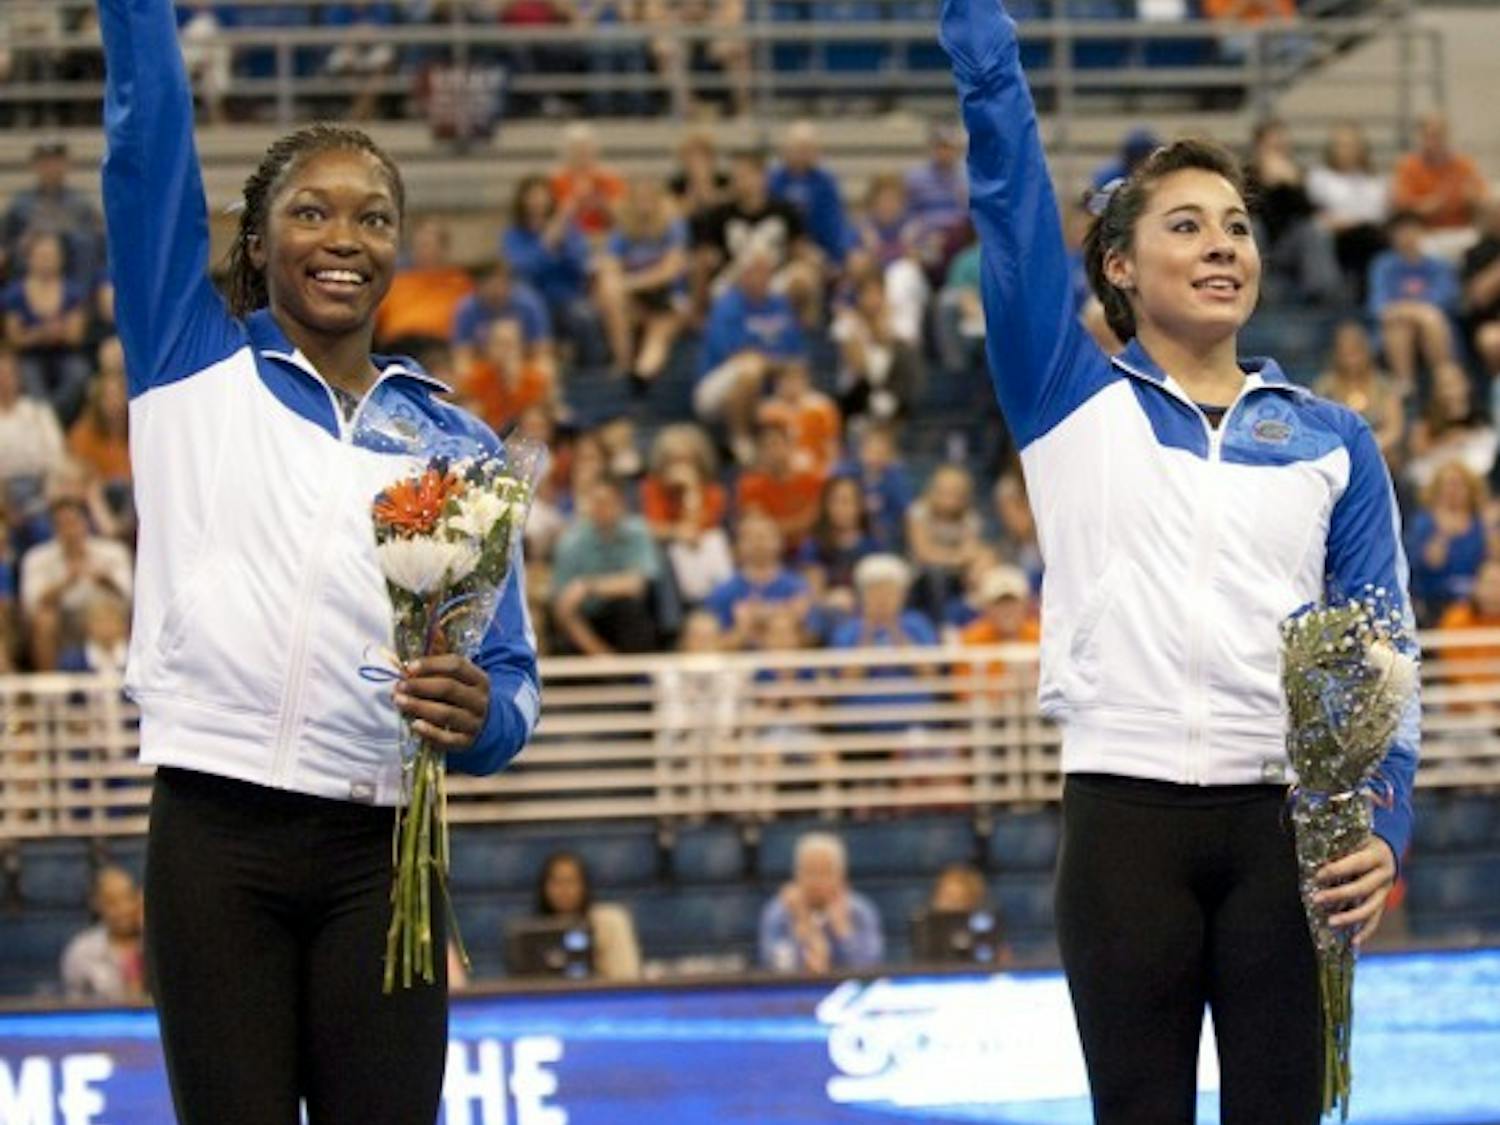 Florida plans to utilize more freshmen early this season, and juniors Ashanée Dickerson (left) and Marissa King have taken on leadership roles.